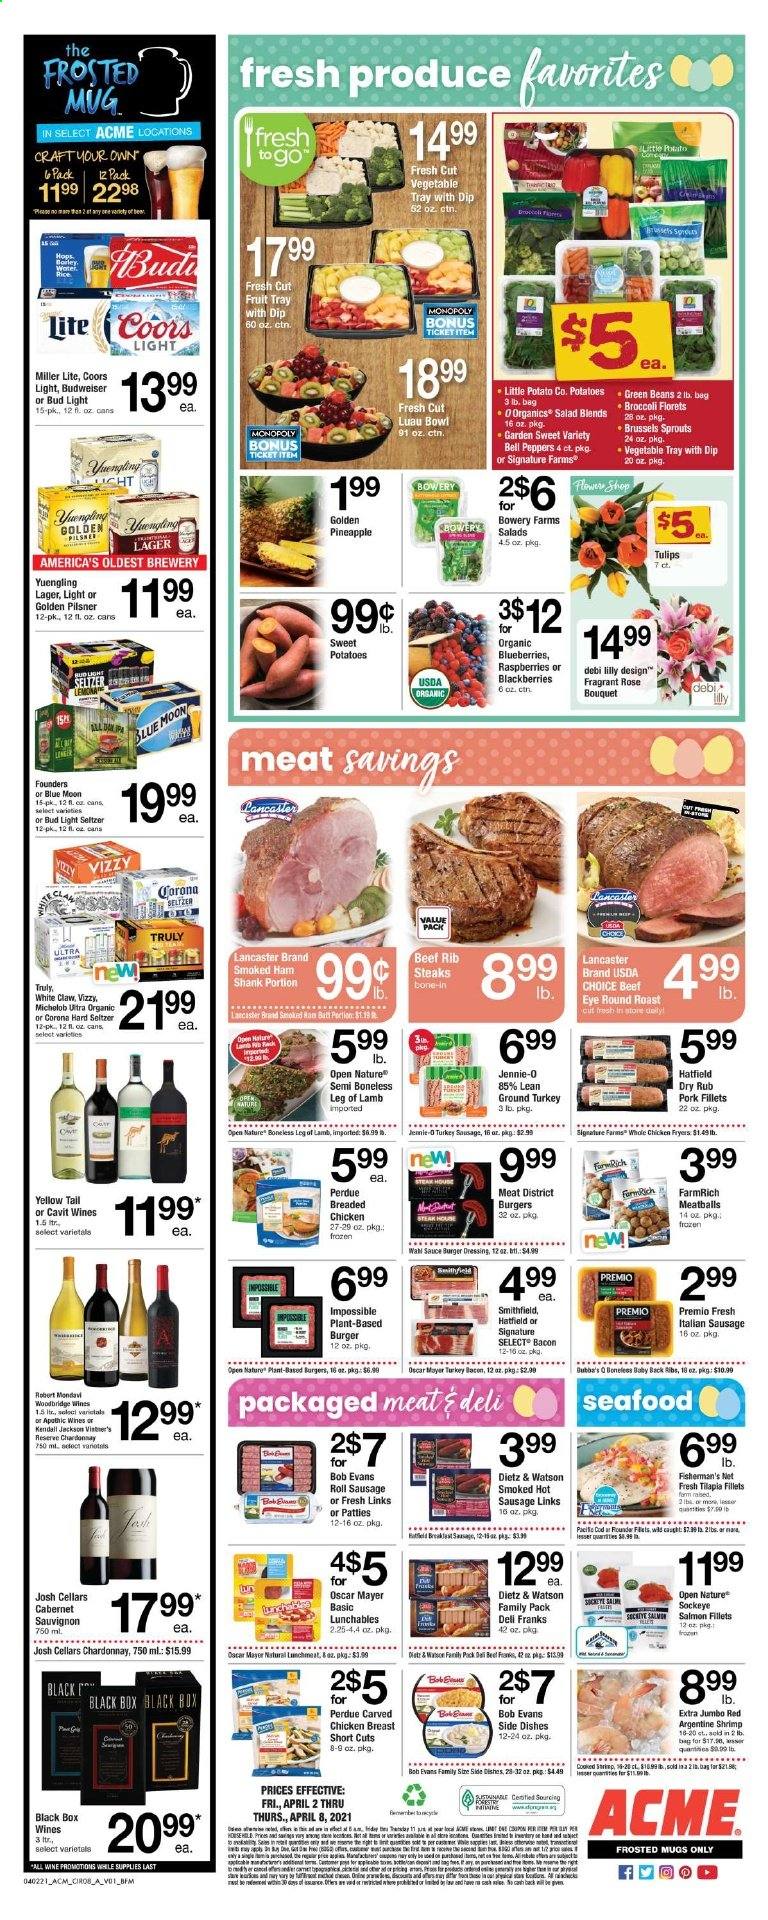 thumbnail - ACME Flyer - 04/02/2021 - 04/08/2021 - Sales products - beans, bell peppers, broccoli, green beans, sweet potato, salad, brussel sprouts, blackberries, blueberries, raspberries, pears, cod, salmon, salmon fillet, tilapia, seafood, shrimps, meatballs, hamburger, sauce, Perdue®, Lunchables, Bob Evans, bacon, ham, ham shank, smoked ham, Oscar Mayer, Dietz & Watson, sausage, italian sausage, lunch meat, dip, dressing, seltzer water, Cabernet Sauvignon, Chardonnay, Woodbridge, White Claw, Hard Seltzer, TRULY, beer, Budweiser, Miller Lite, Coors, Blue Moon, Yuengling, Bud Light, Corona Extra, Lager, Golden Pilsner, ground turkey, whole chicken, beef meat, steak, round roast, pork meat, pork back ribs, lamb leg, mug, tray, bowl, pineapple, potatoes, peppers. Page 8.